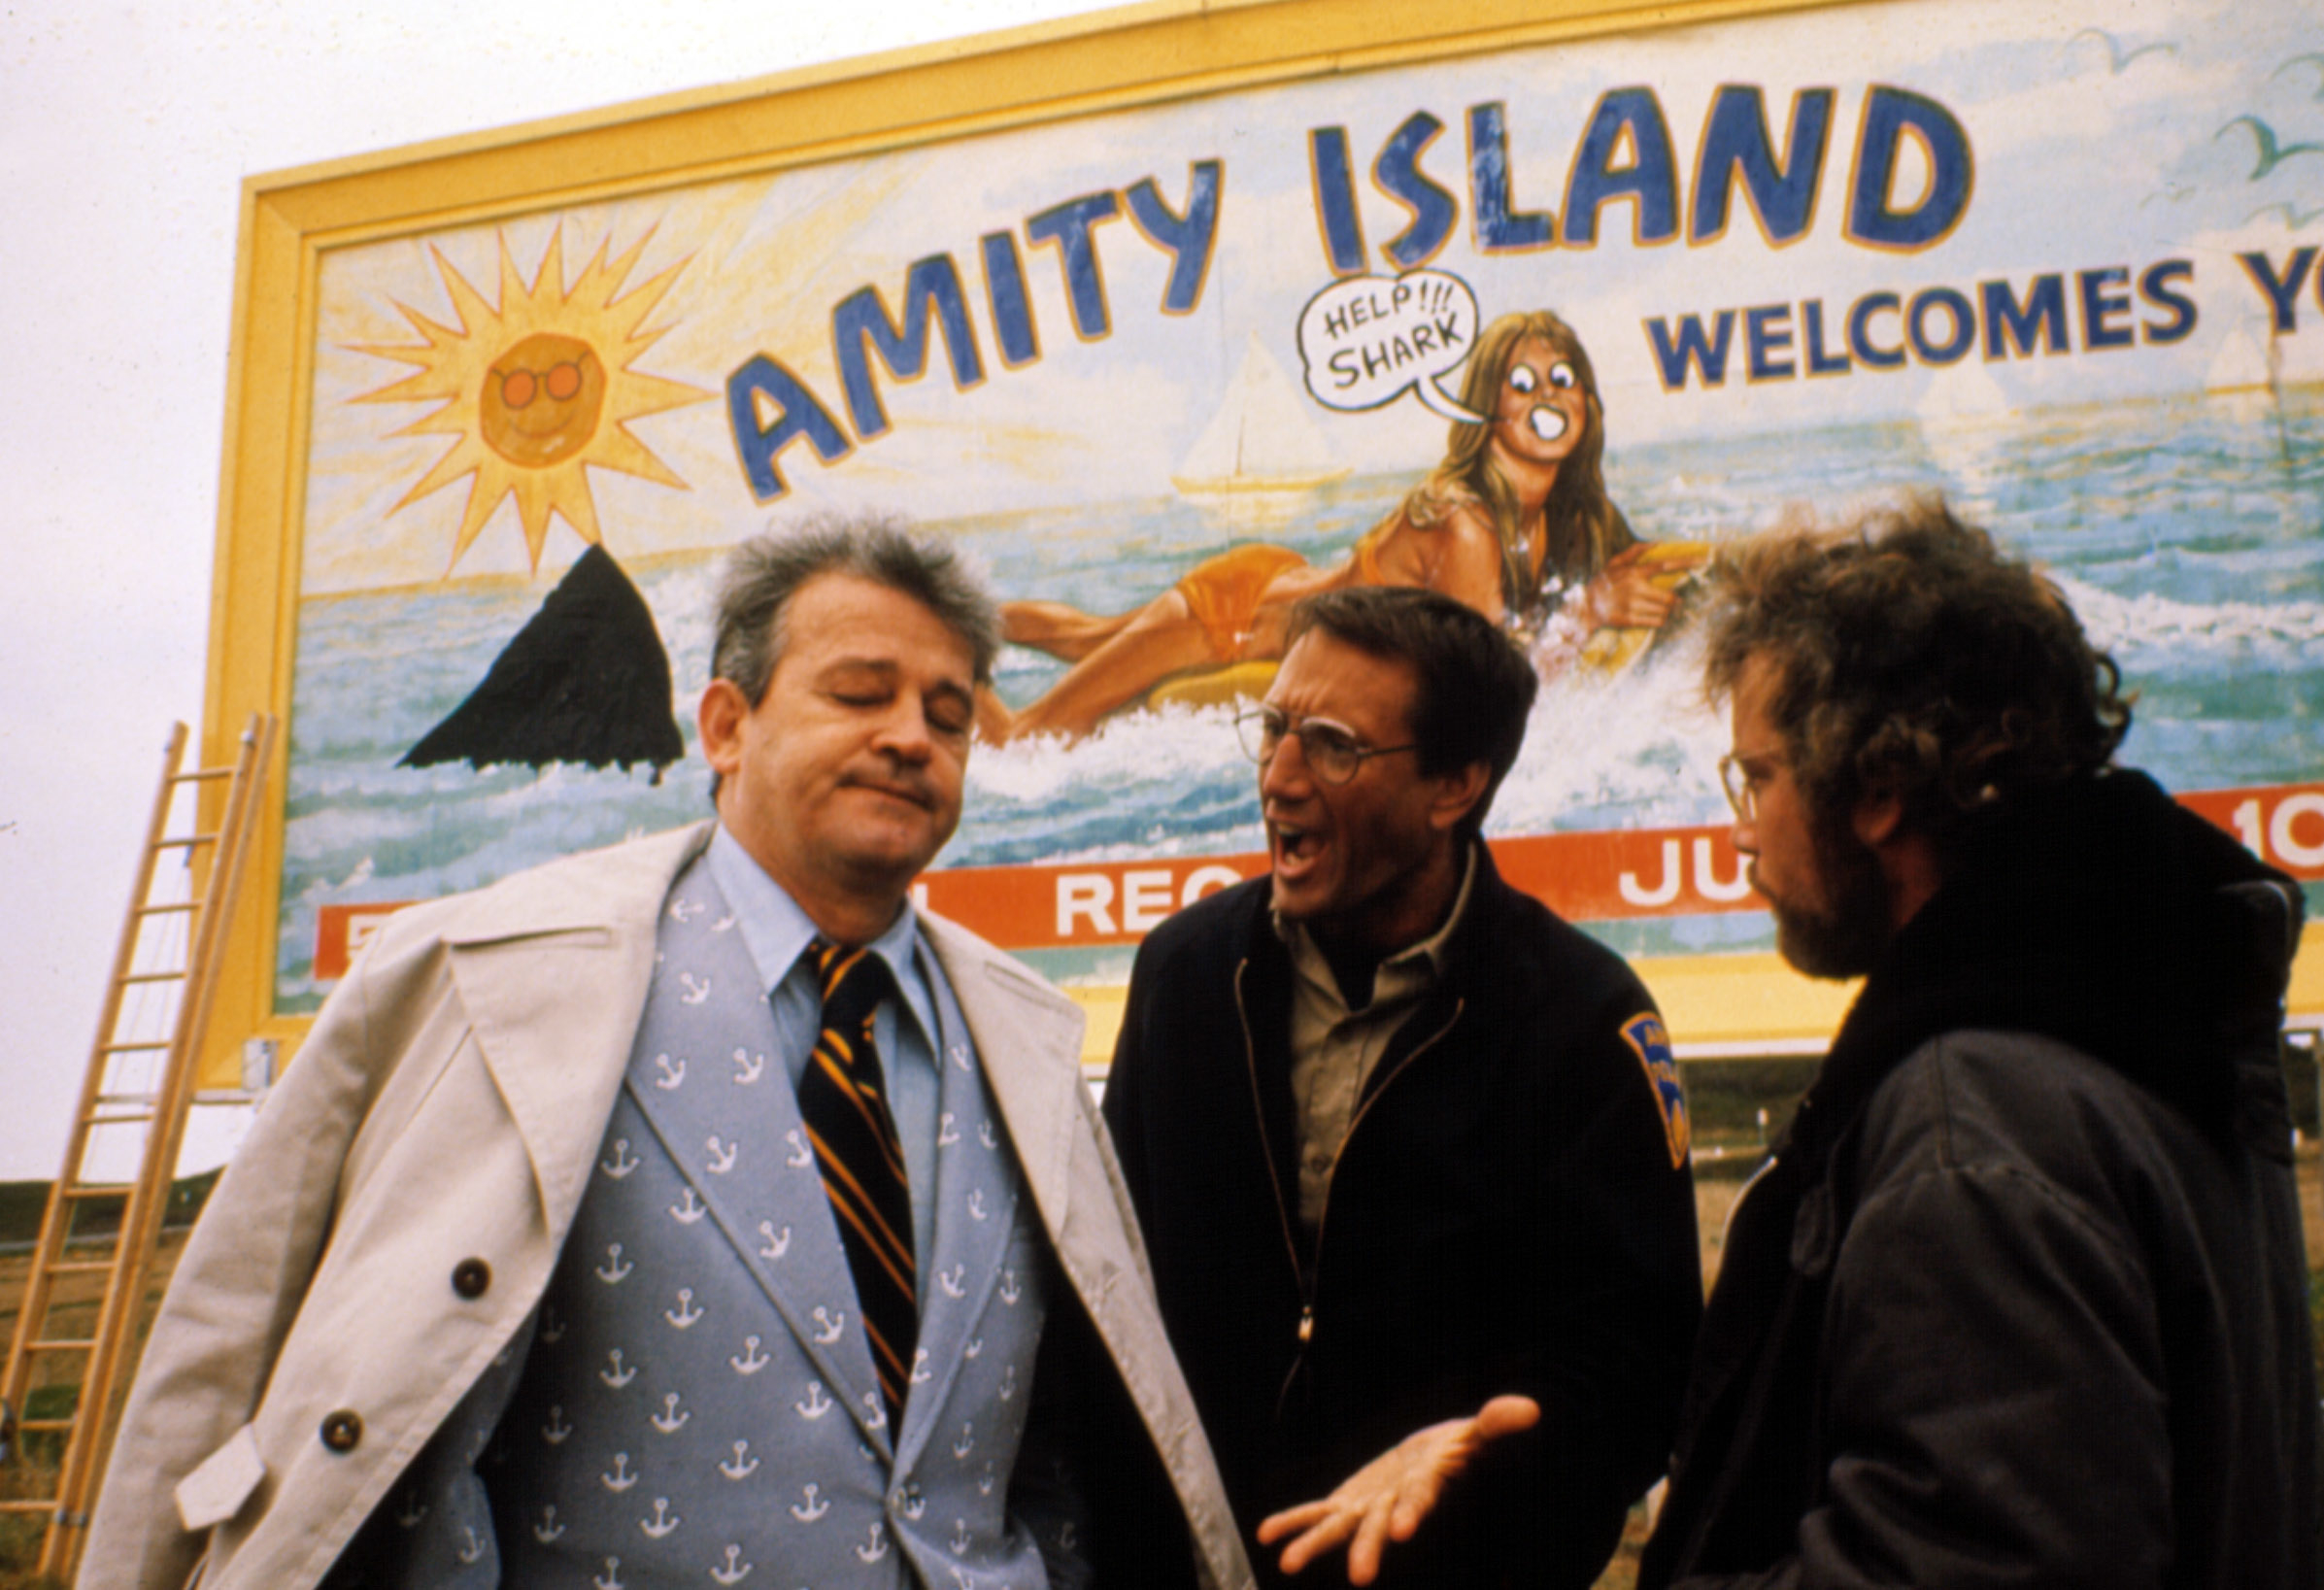 From left: Murray Hamilton, Roy Scheider, and Richard Dreyfuss stand in front of an &quot;Amity Island Welcomes You&quot; billboard in a scene from &quot;Jaws&quot;